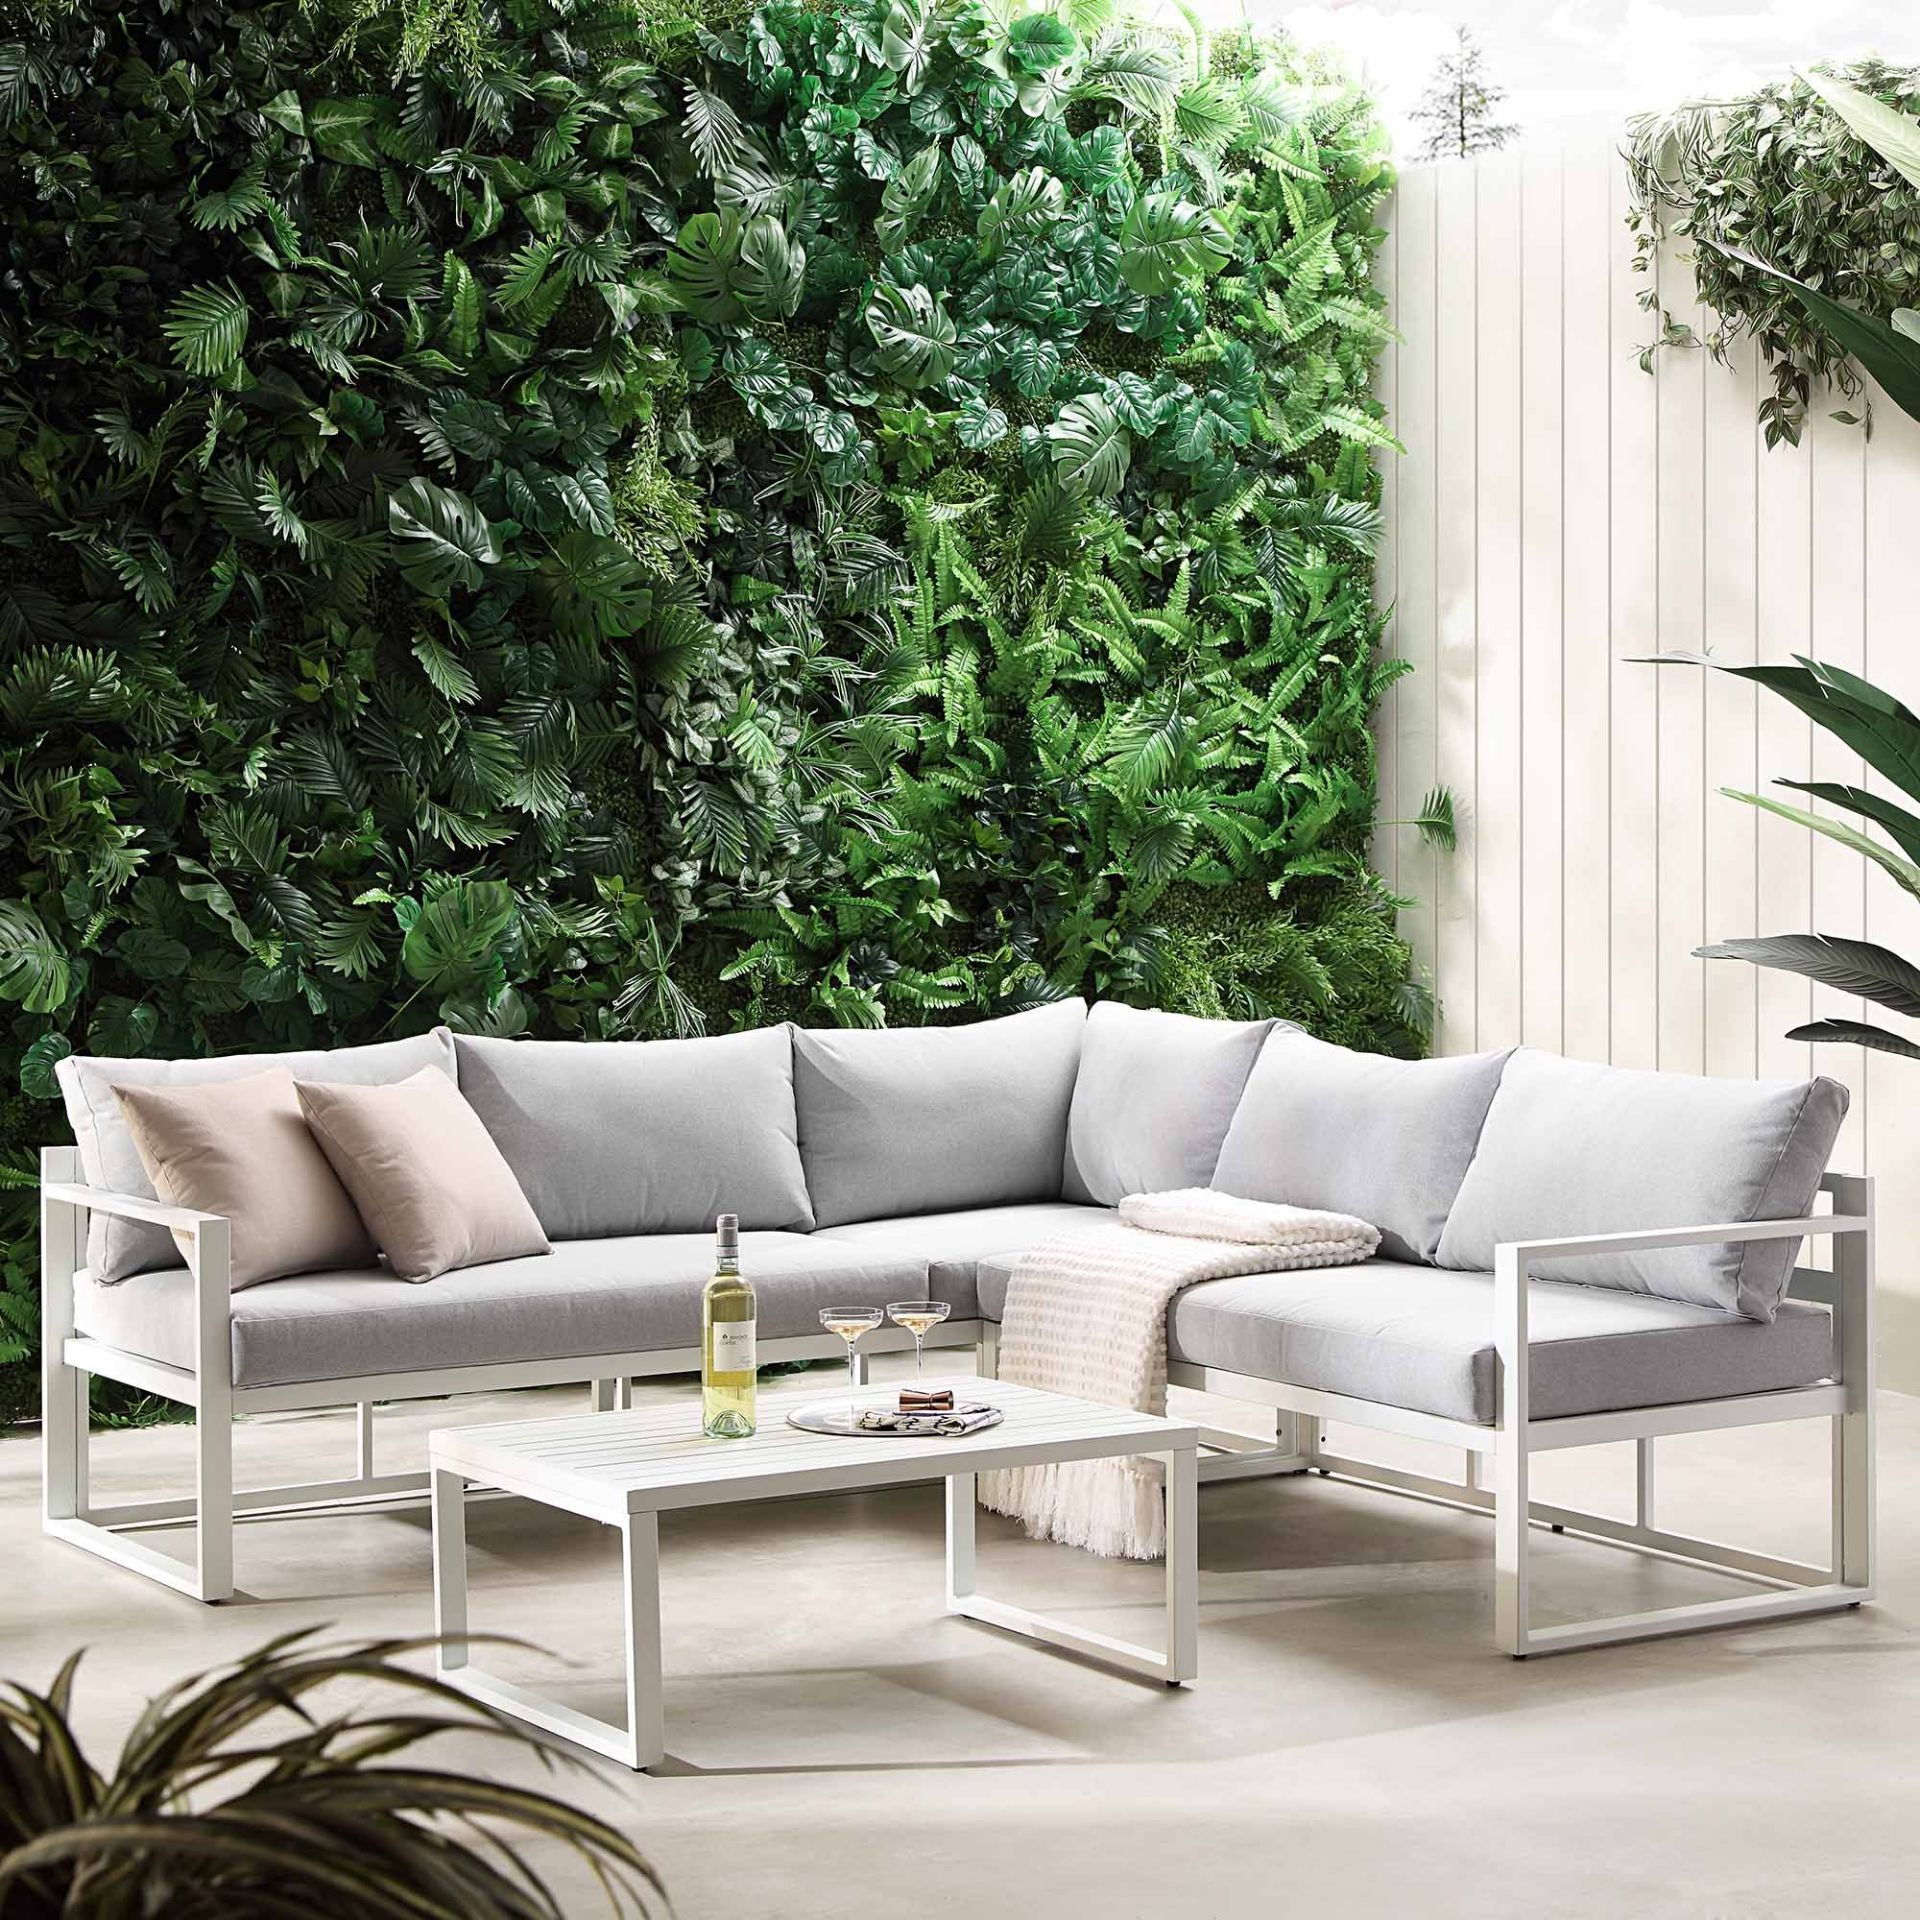 Albany Aluminium Corner Sofa Set with Reclining Back and Coffee Table, White. - R14. RRP £959.99.